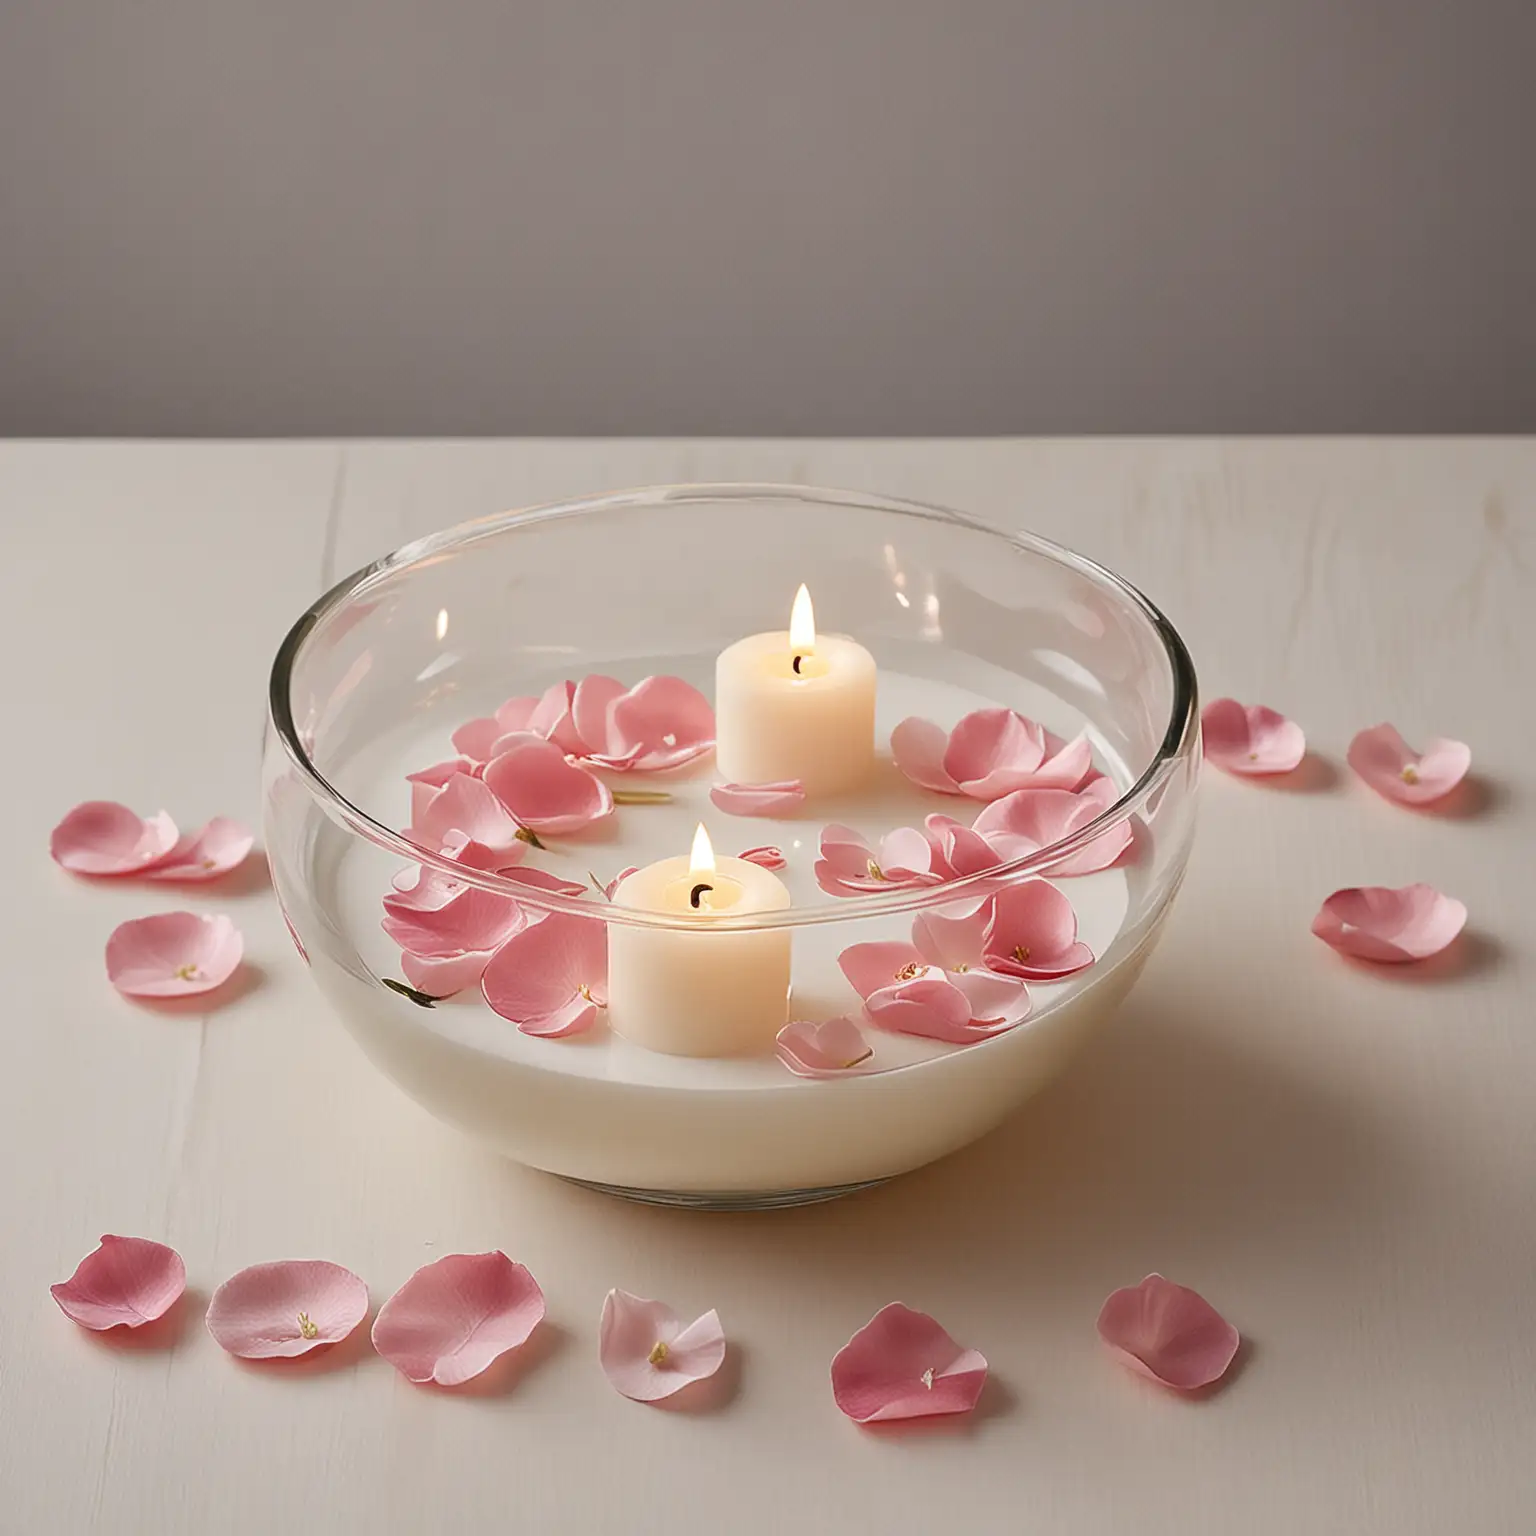 Experience the understated charm of floating candles and delicate petals in a small round bowl vase, perfect for setting a romantic ambiance.

This minimalist centerpiece captivates with its simplicity, ideal for evening or garden-themed weddings. 

The gentle illumination of the candles paired with the soft drift of petals provides a serene atmosphere, blending with the elegance of minimalist decor